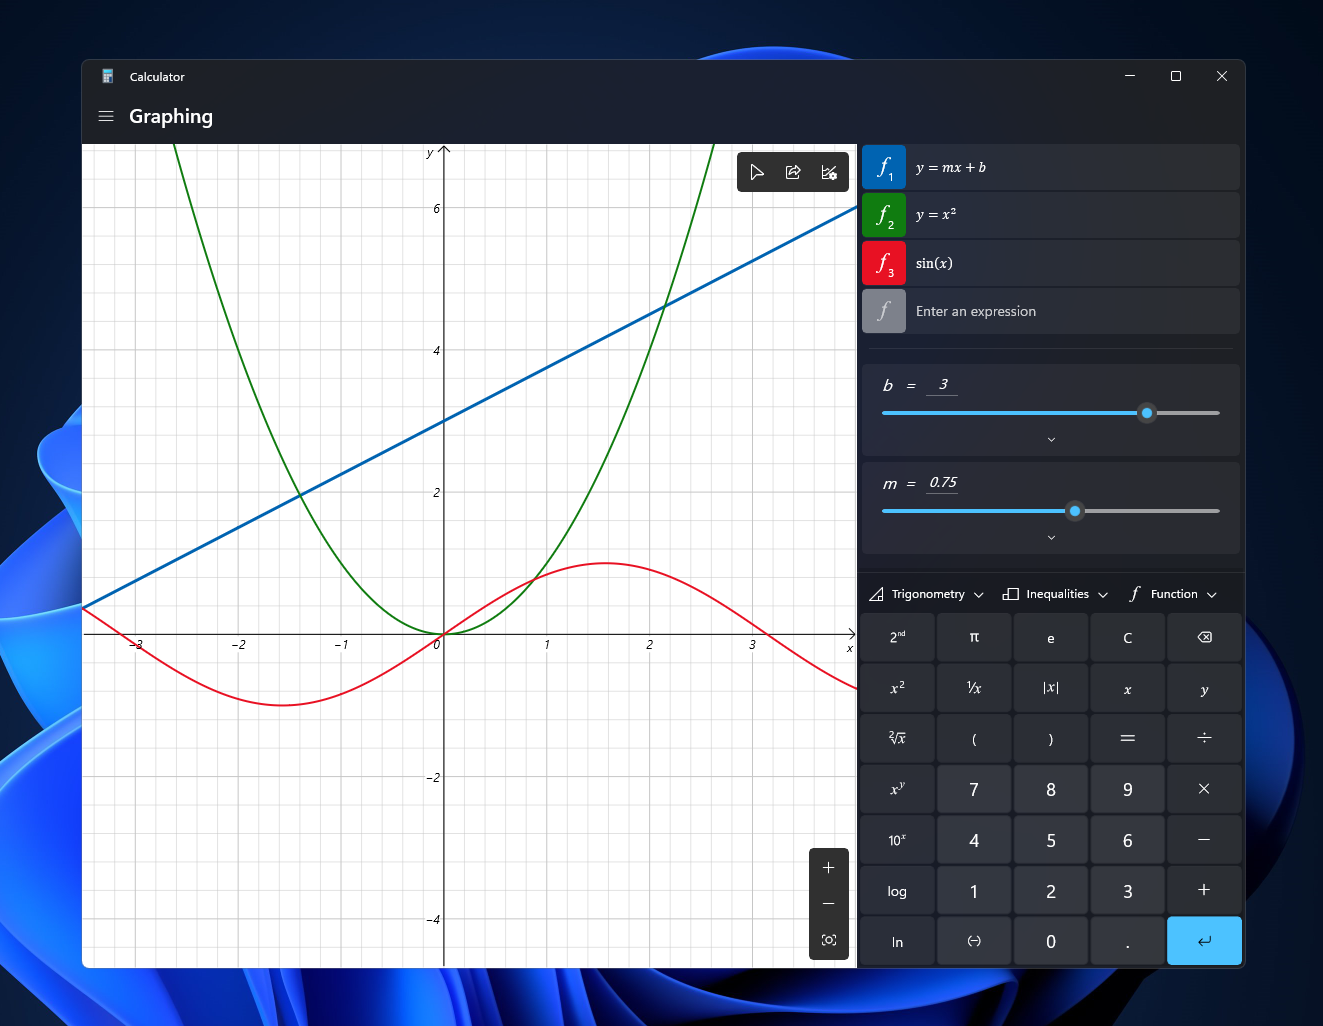 Graphing in the Calculator app.